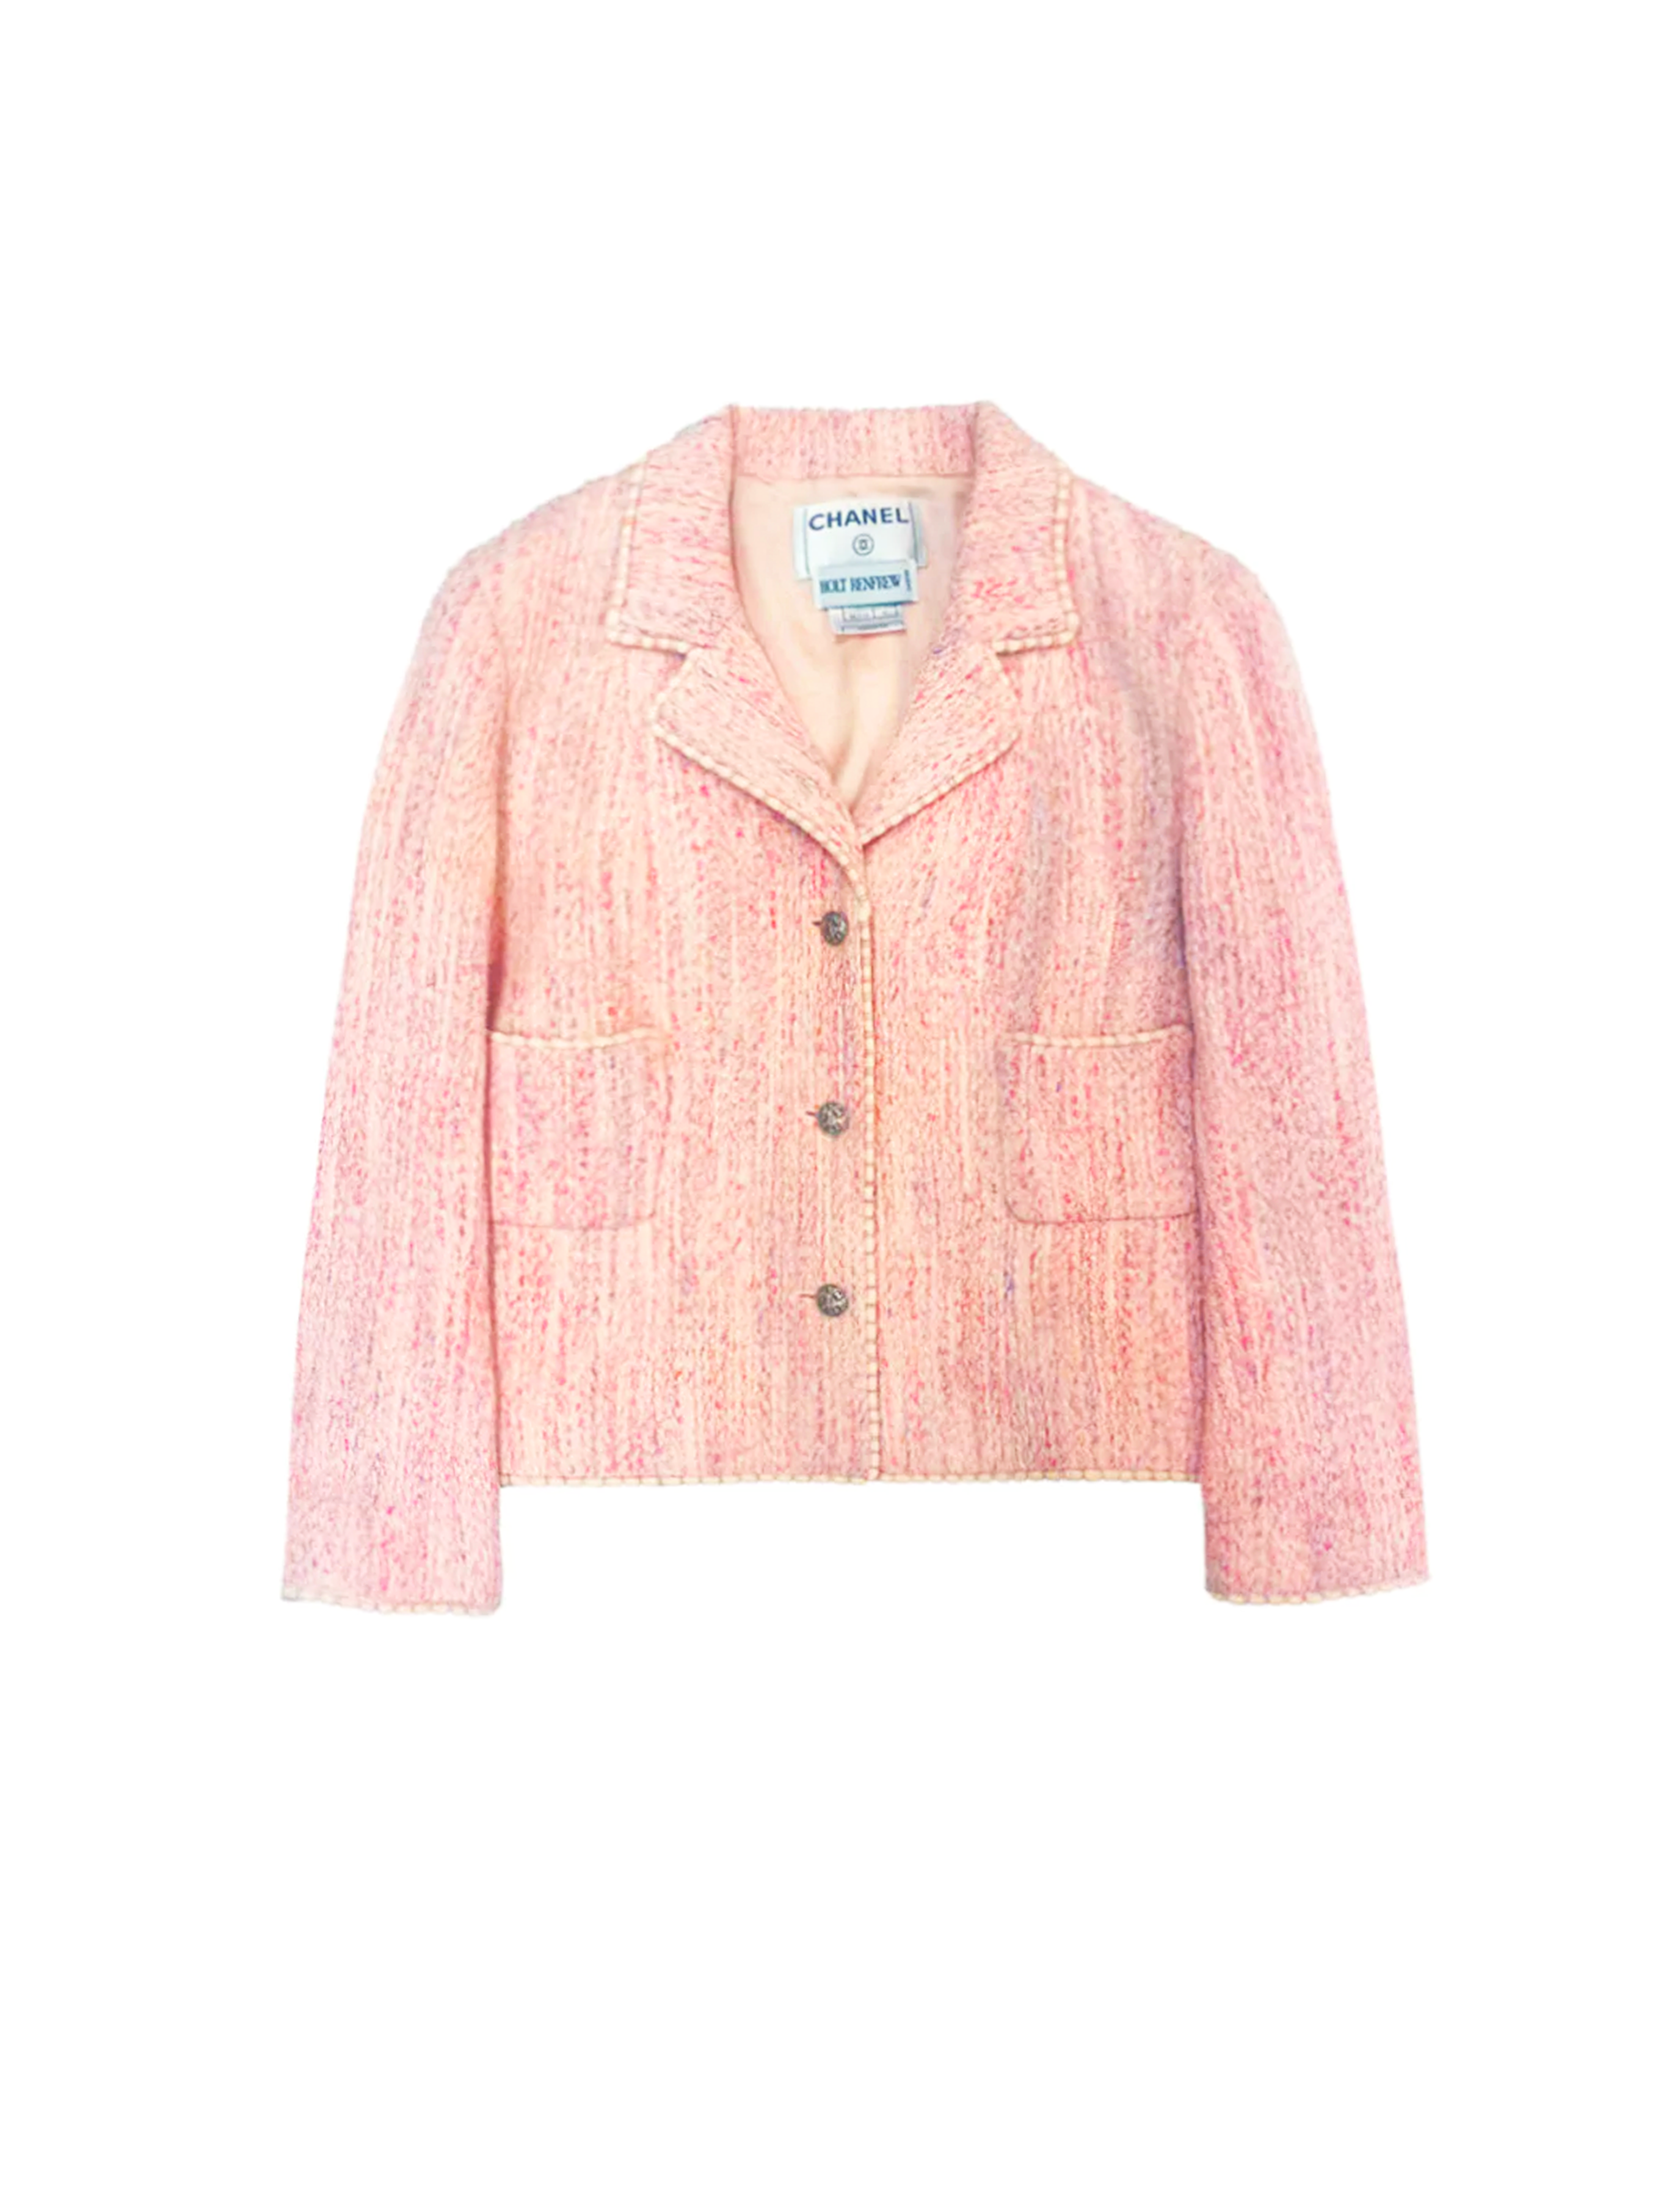 Chanel 2005 Pink Blazer with SIlver Logo Buttons